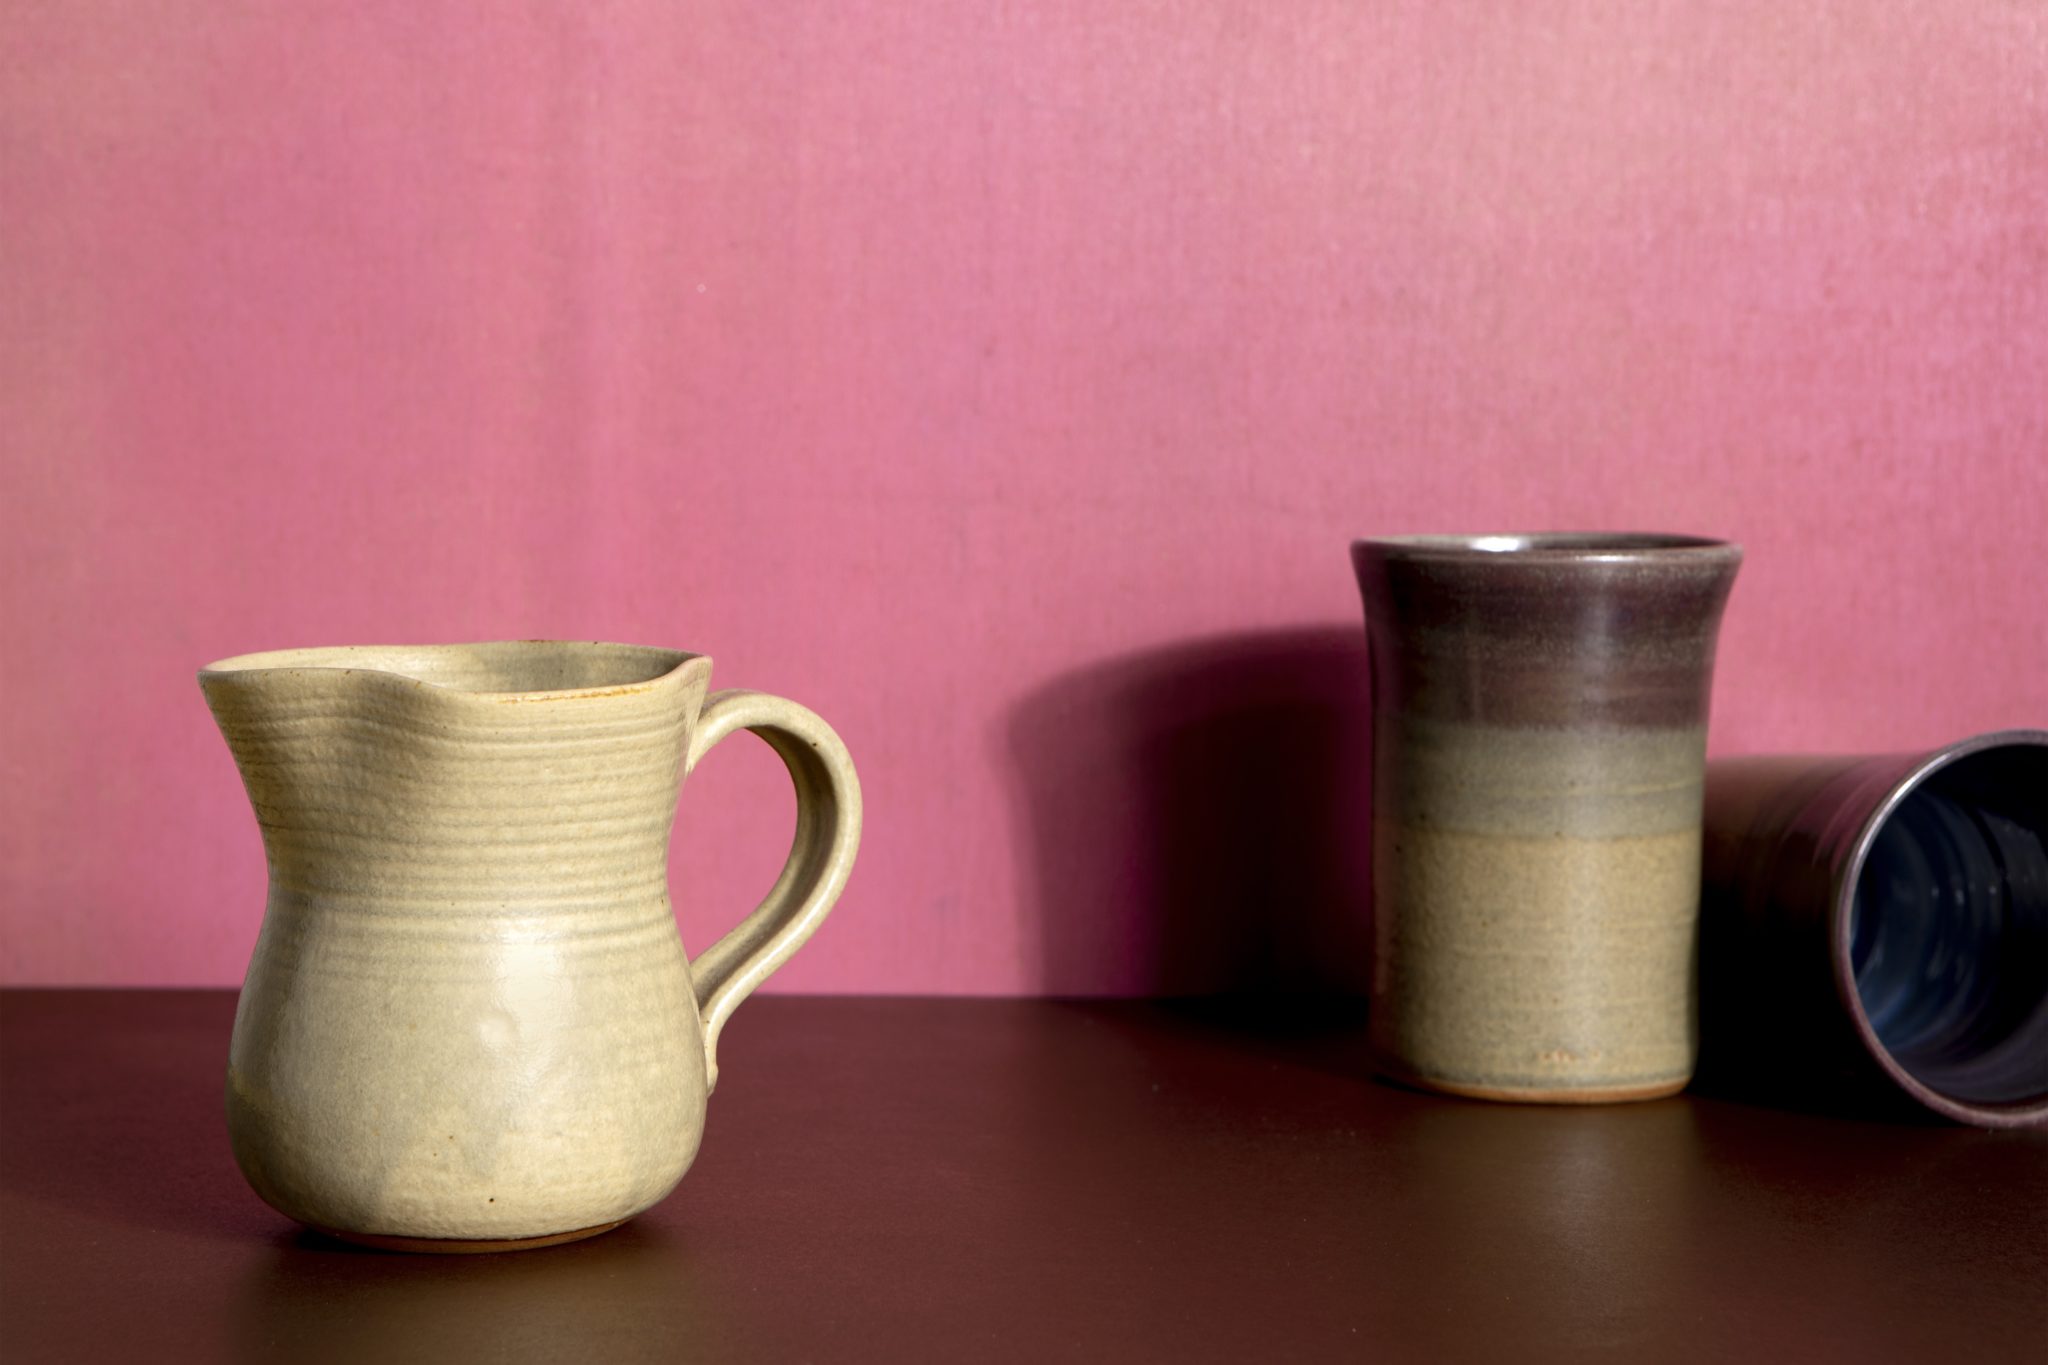 Bespoke stoneware crafted by local artisans